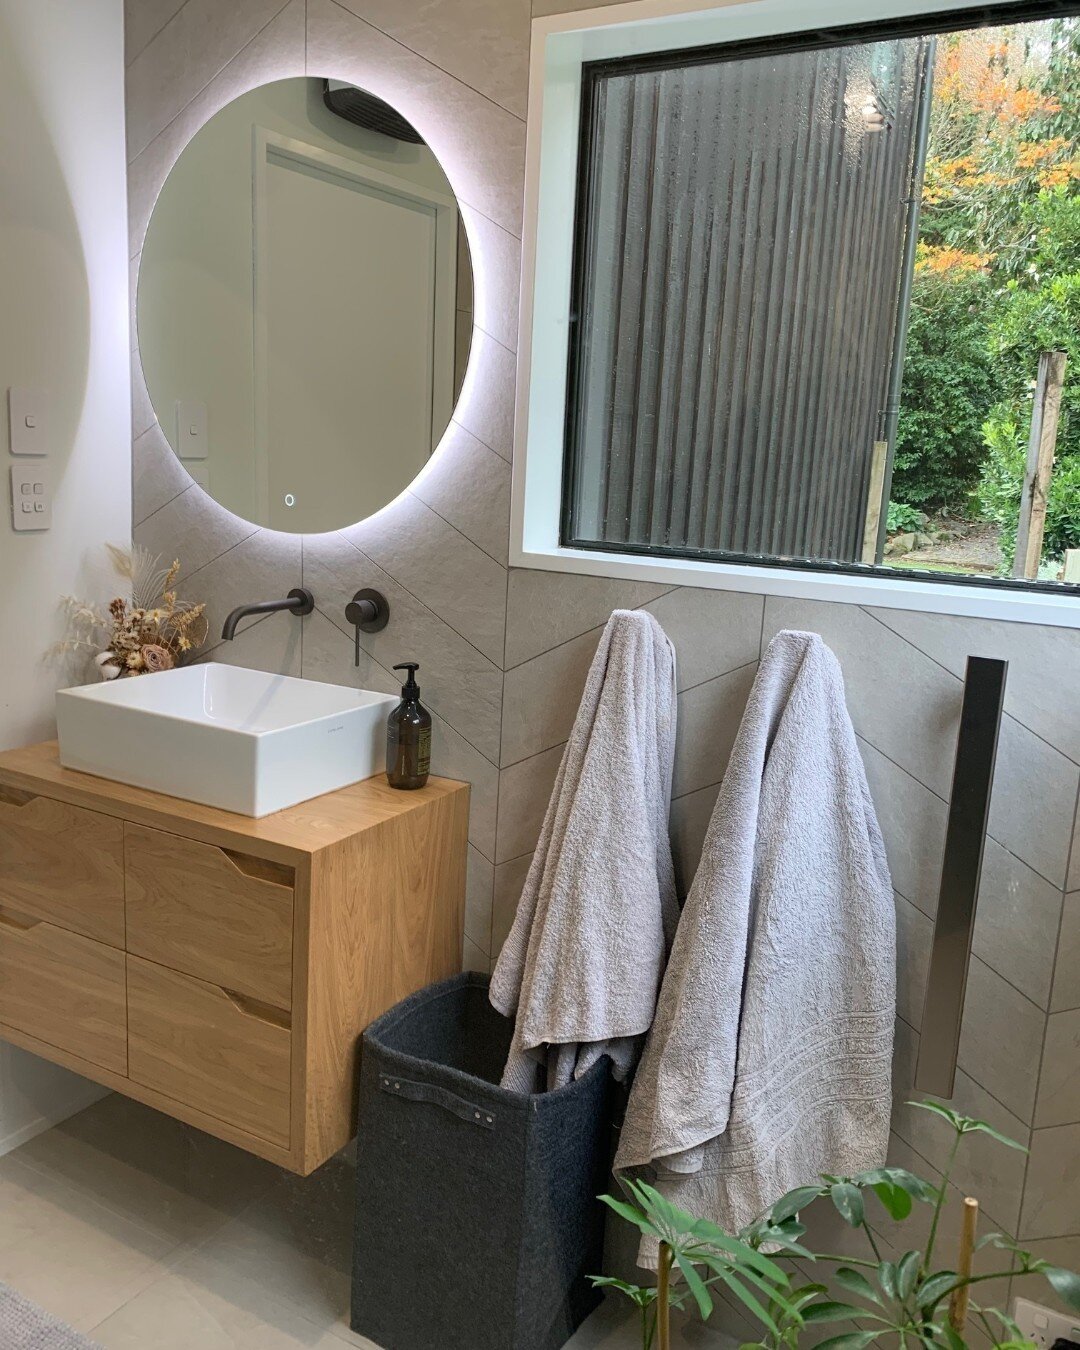 Colder temperatures are here, which means it's more important than ever to be comfortable and cosy at your place!

Swipe through these photos from our recently renovated family home in Matangi - and get a dose of inspiration for your own bathroom spa